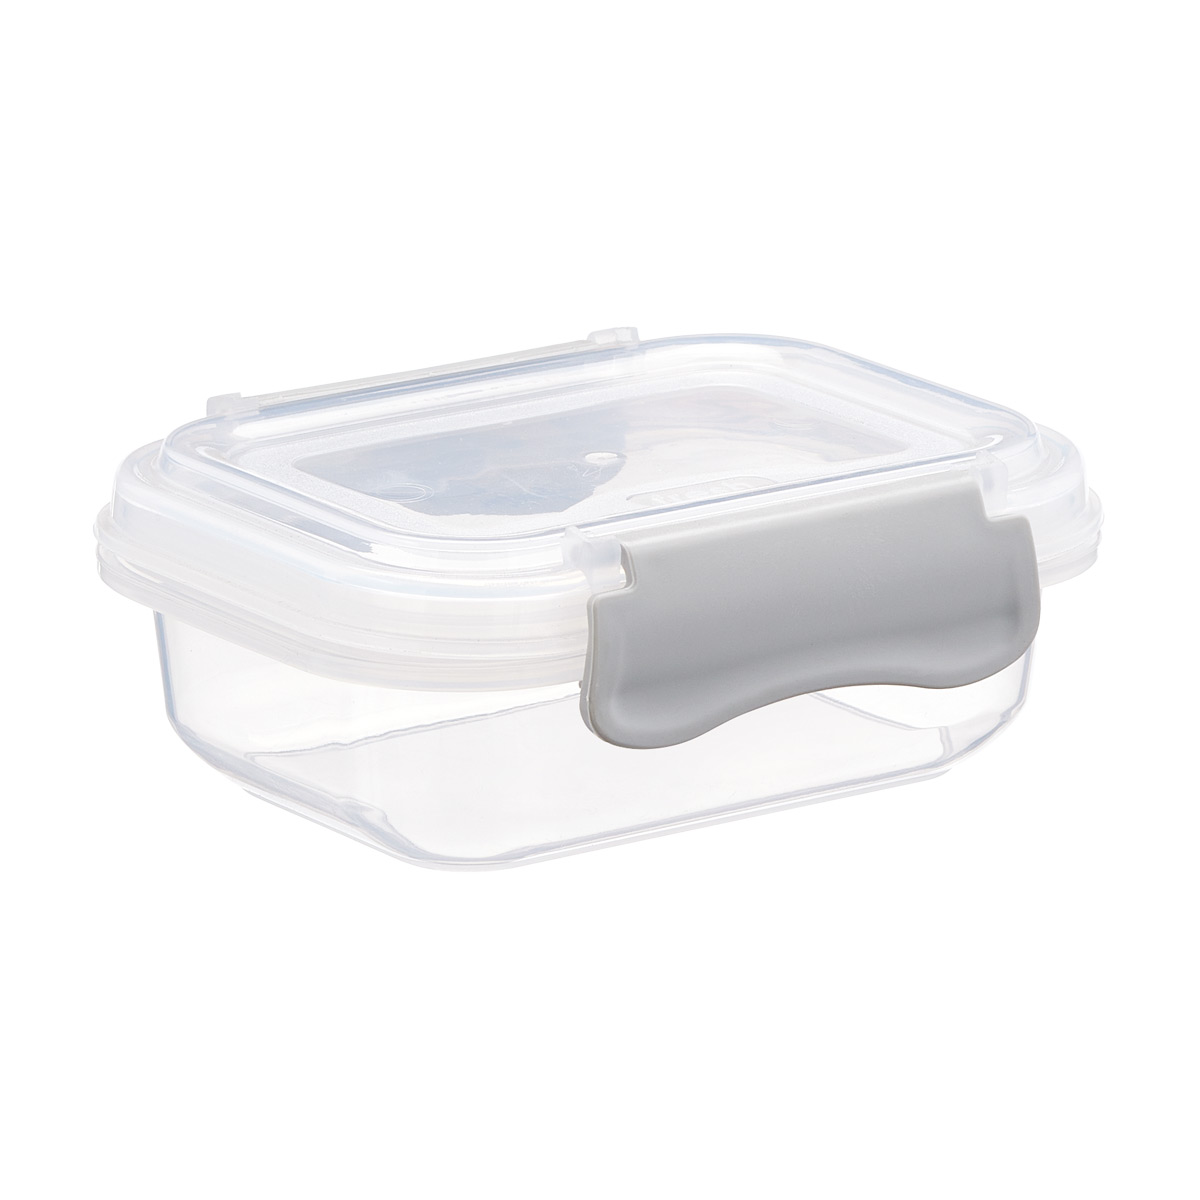 https://www.containerstore.com/catalogimages/438085/10083930_6.8_Oz_Mini_Food_Storage_Co.jpg